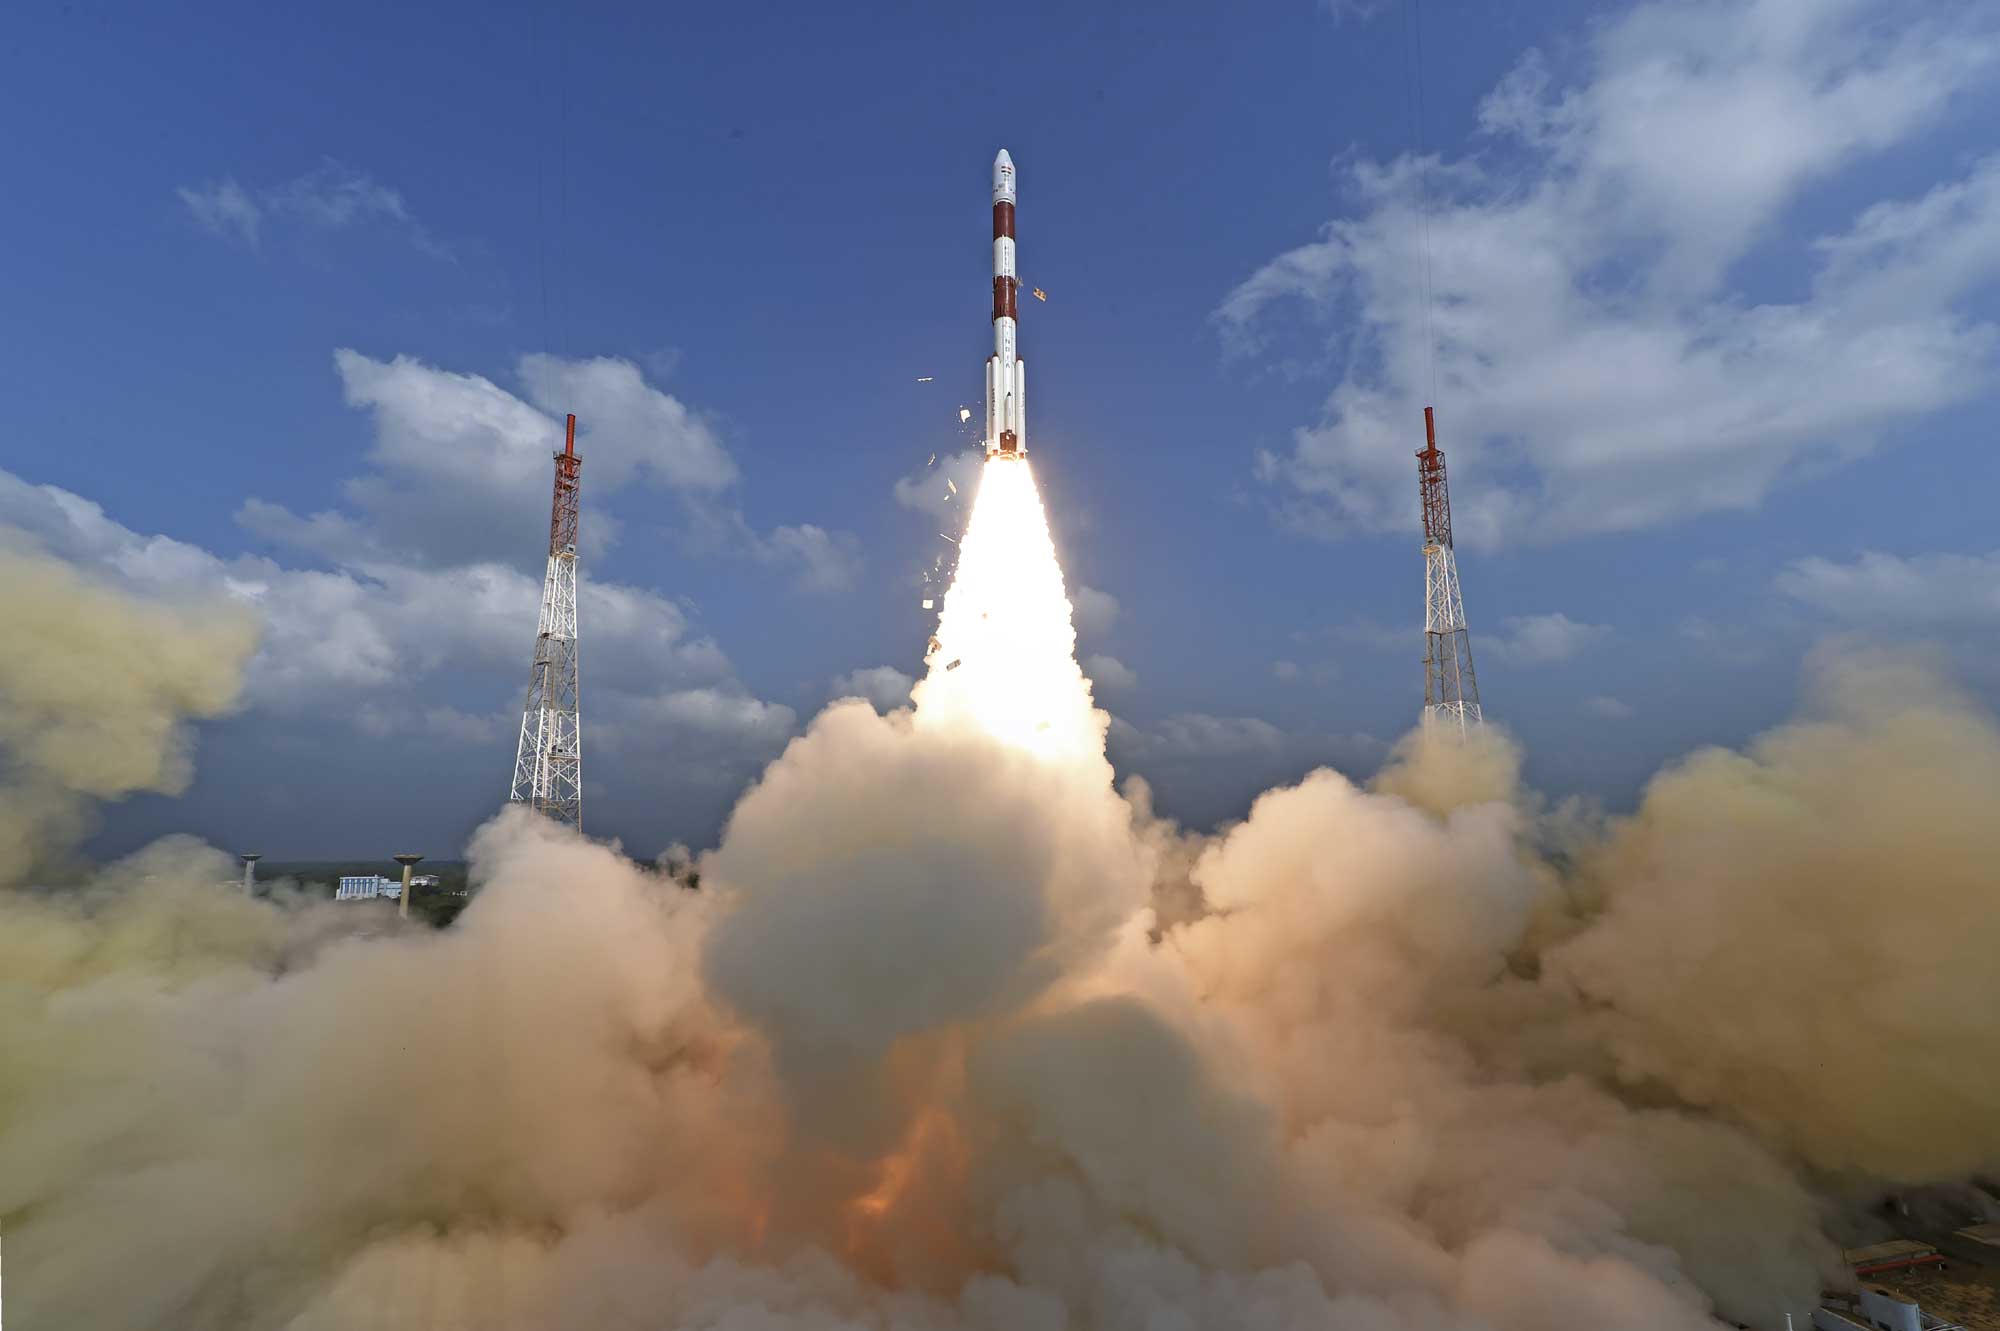 This photograph released by Indian Space Research Organization shows its polar satellite launch vehicle lifting off from a launch pad at the Satish Dhawan Space Centre in India, Wednesday, Feb.15, 2017. [Photo: Indian Space Research Organization via AP]